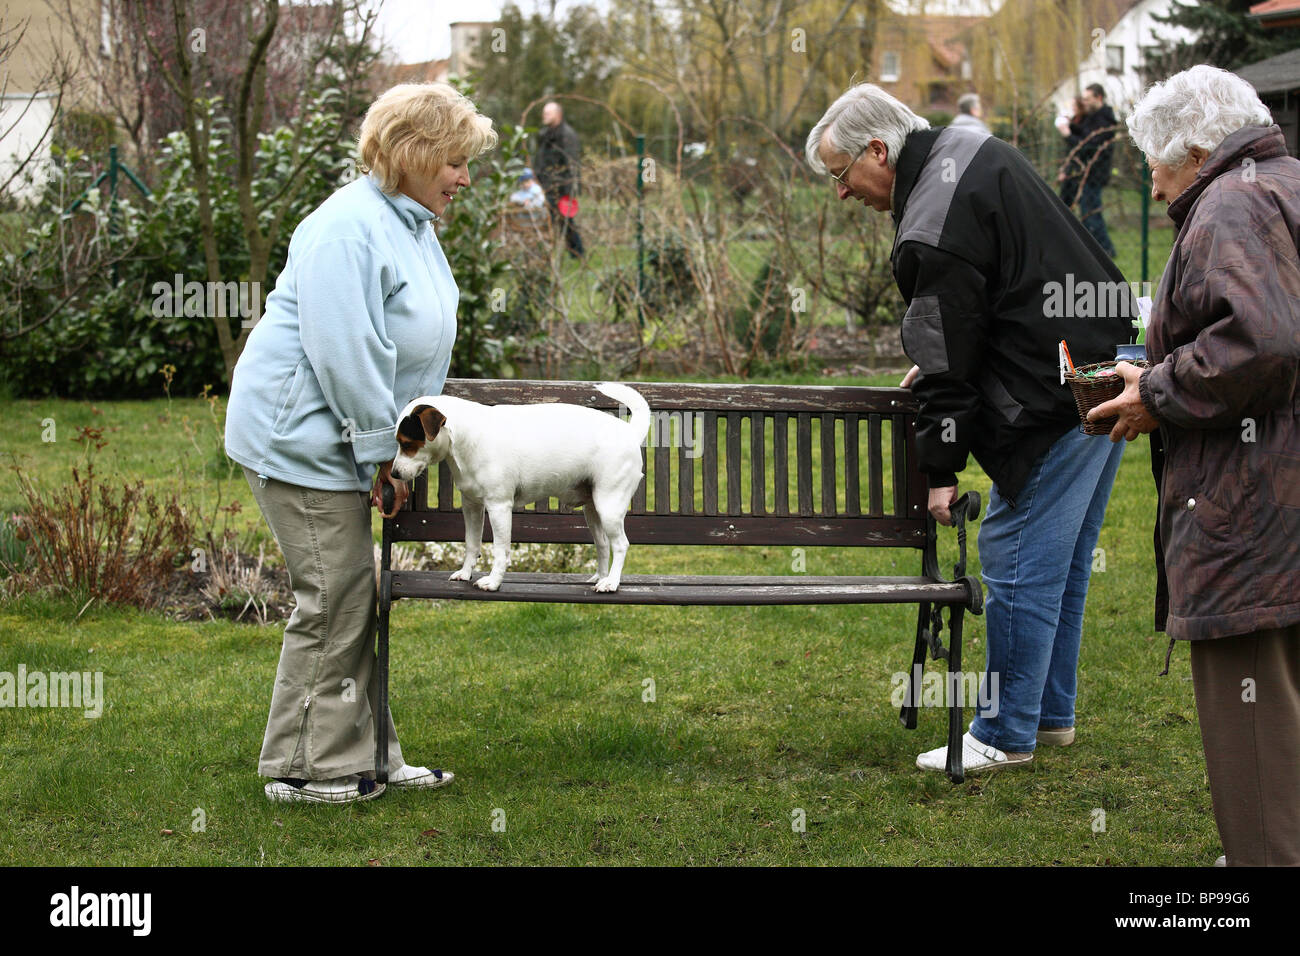 A woman and a man carrying a garden bench with a dog on it, Cottbus, Germany Stock Photo